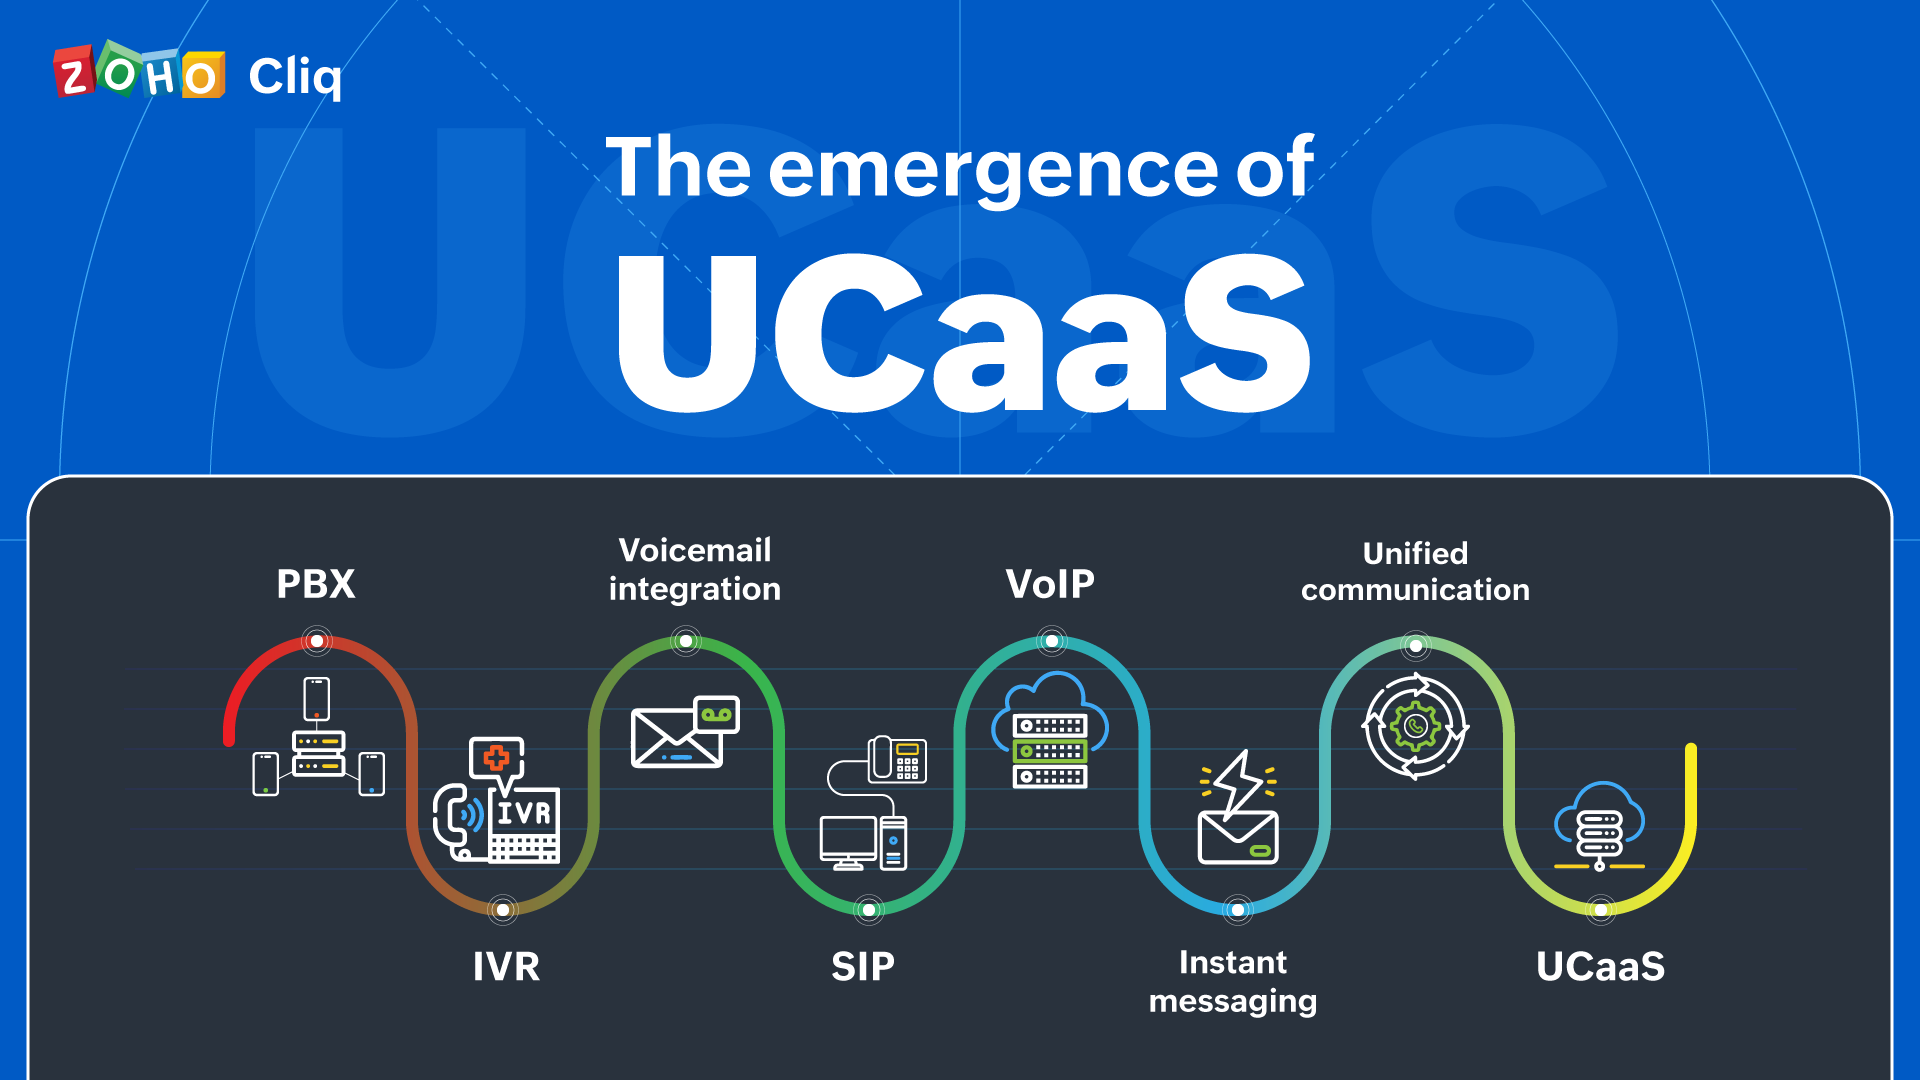 How UCaaS came to be